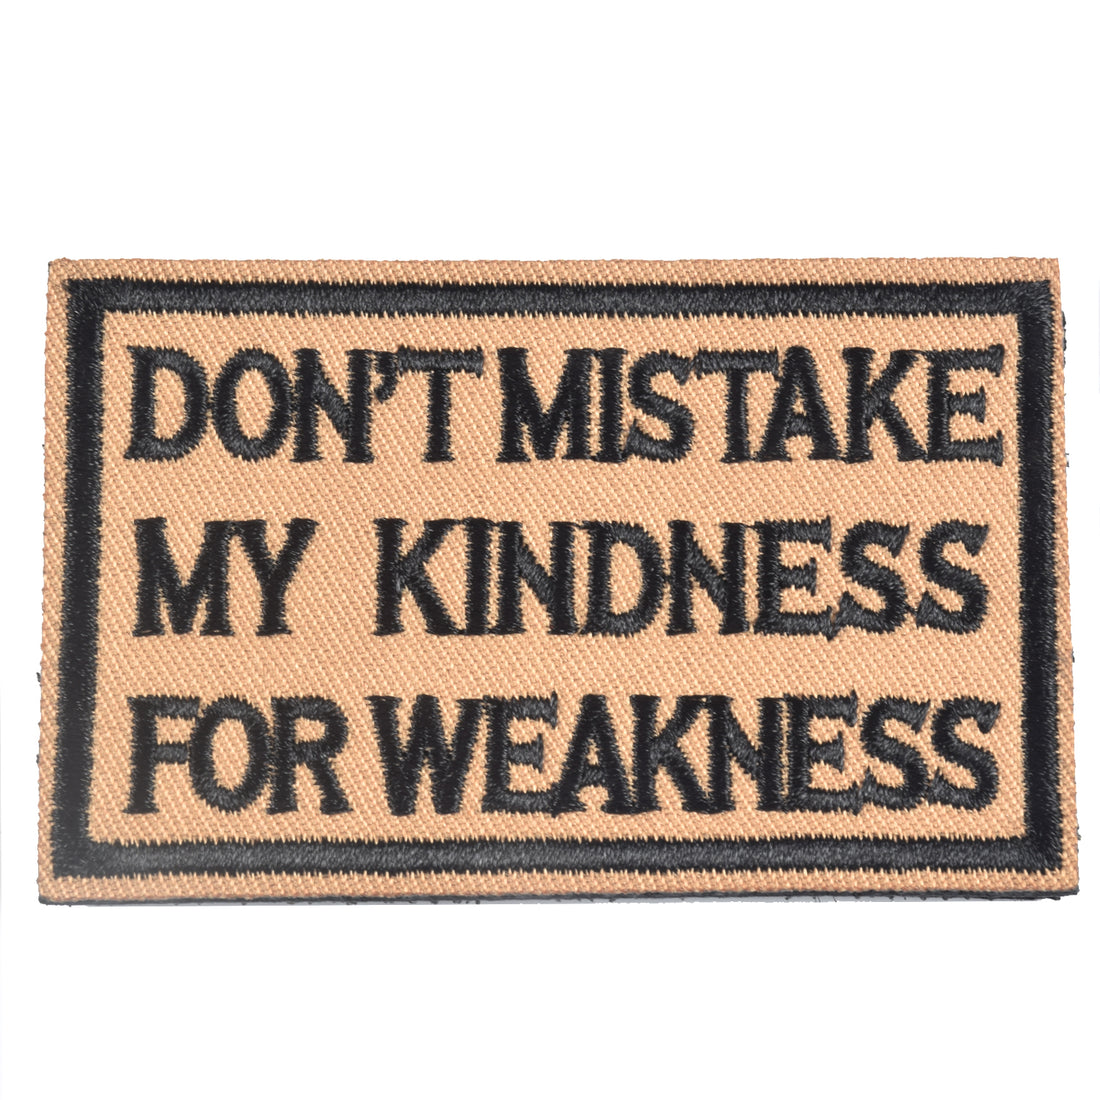 DON'T MISTAKE MY KINDNESS FOR WEAKNESS Patch, Tactical Morale Patch with Hook & Loop Decorative Embroidered, Coyote & Black